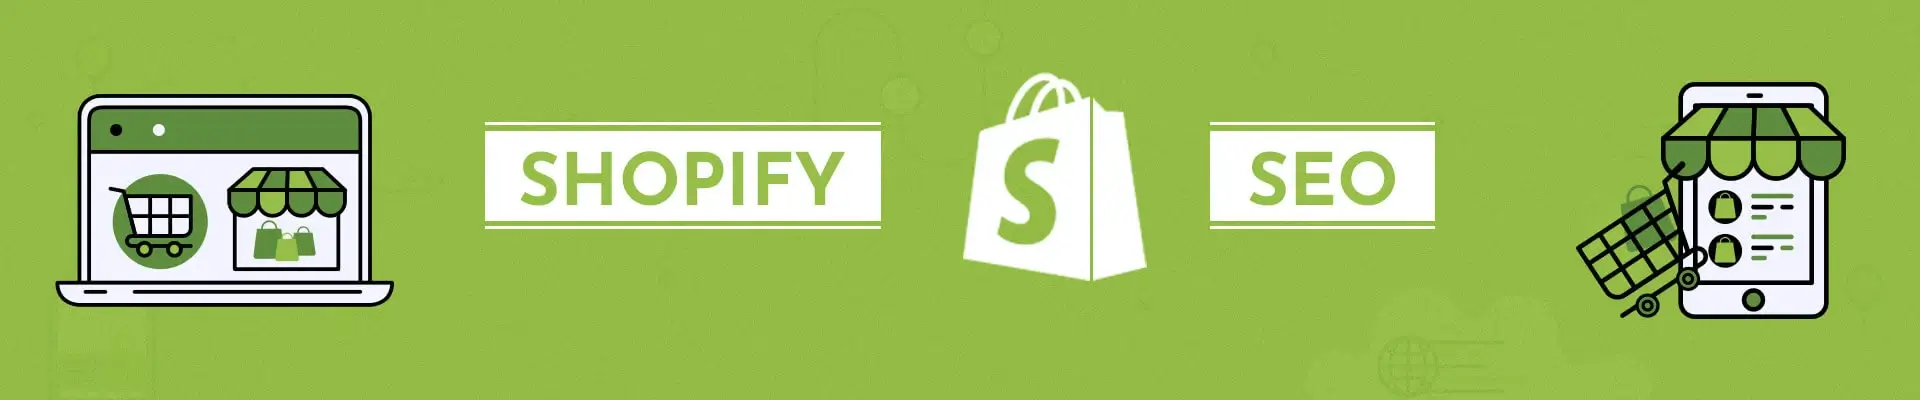 Shopify SEO Guide To Rank Your Shopify Store